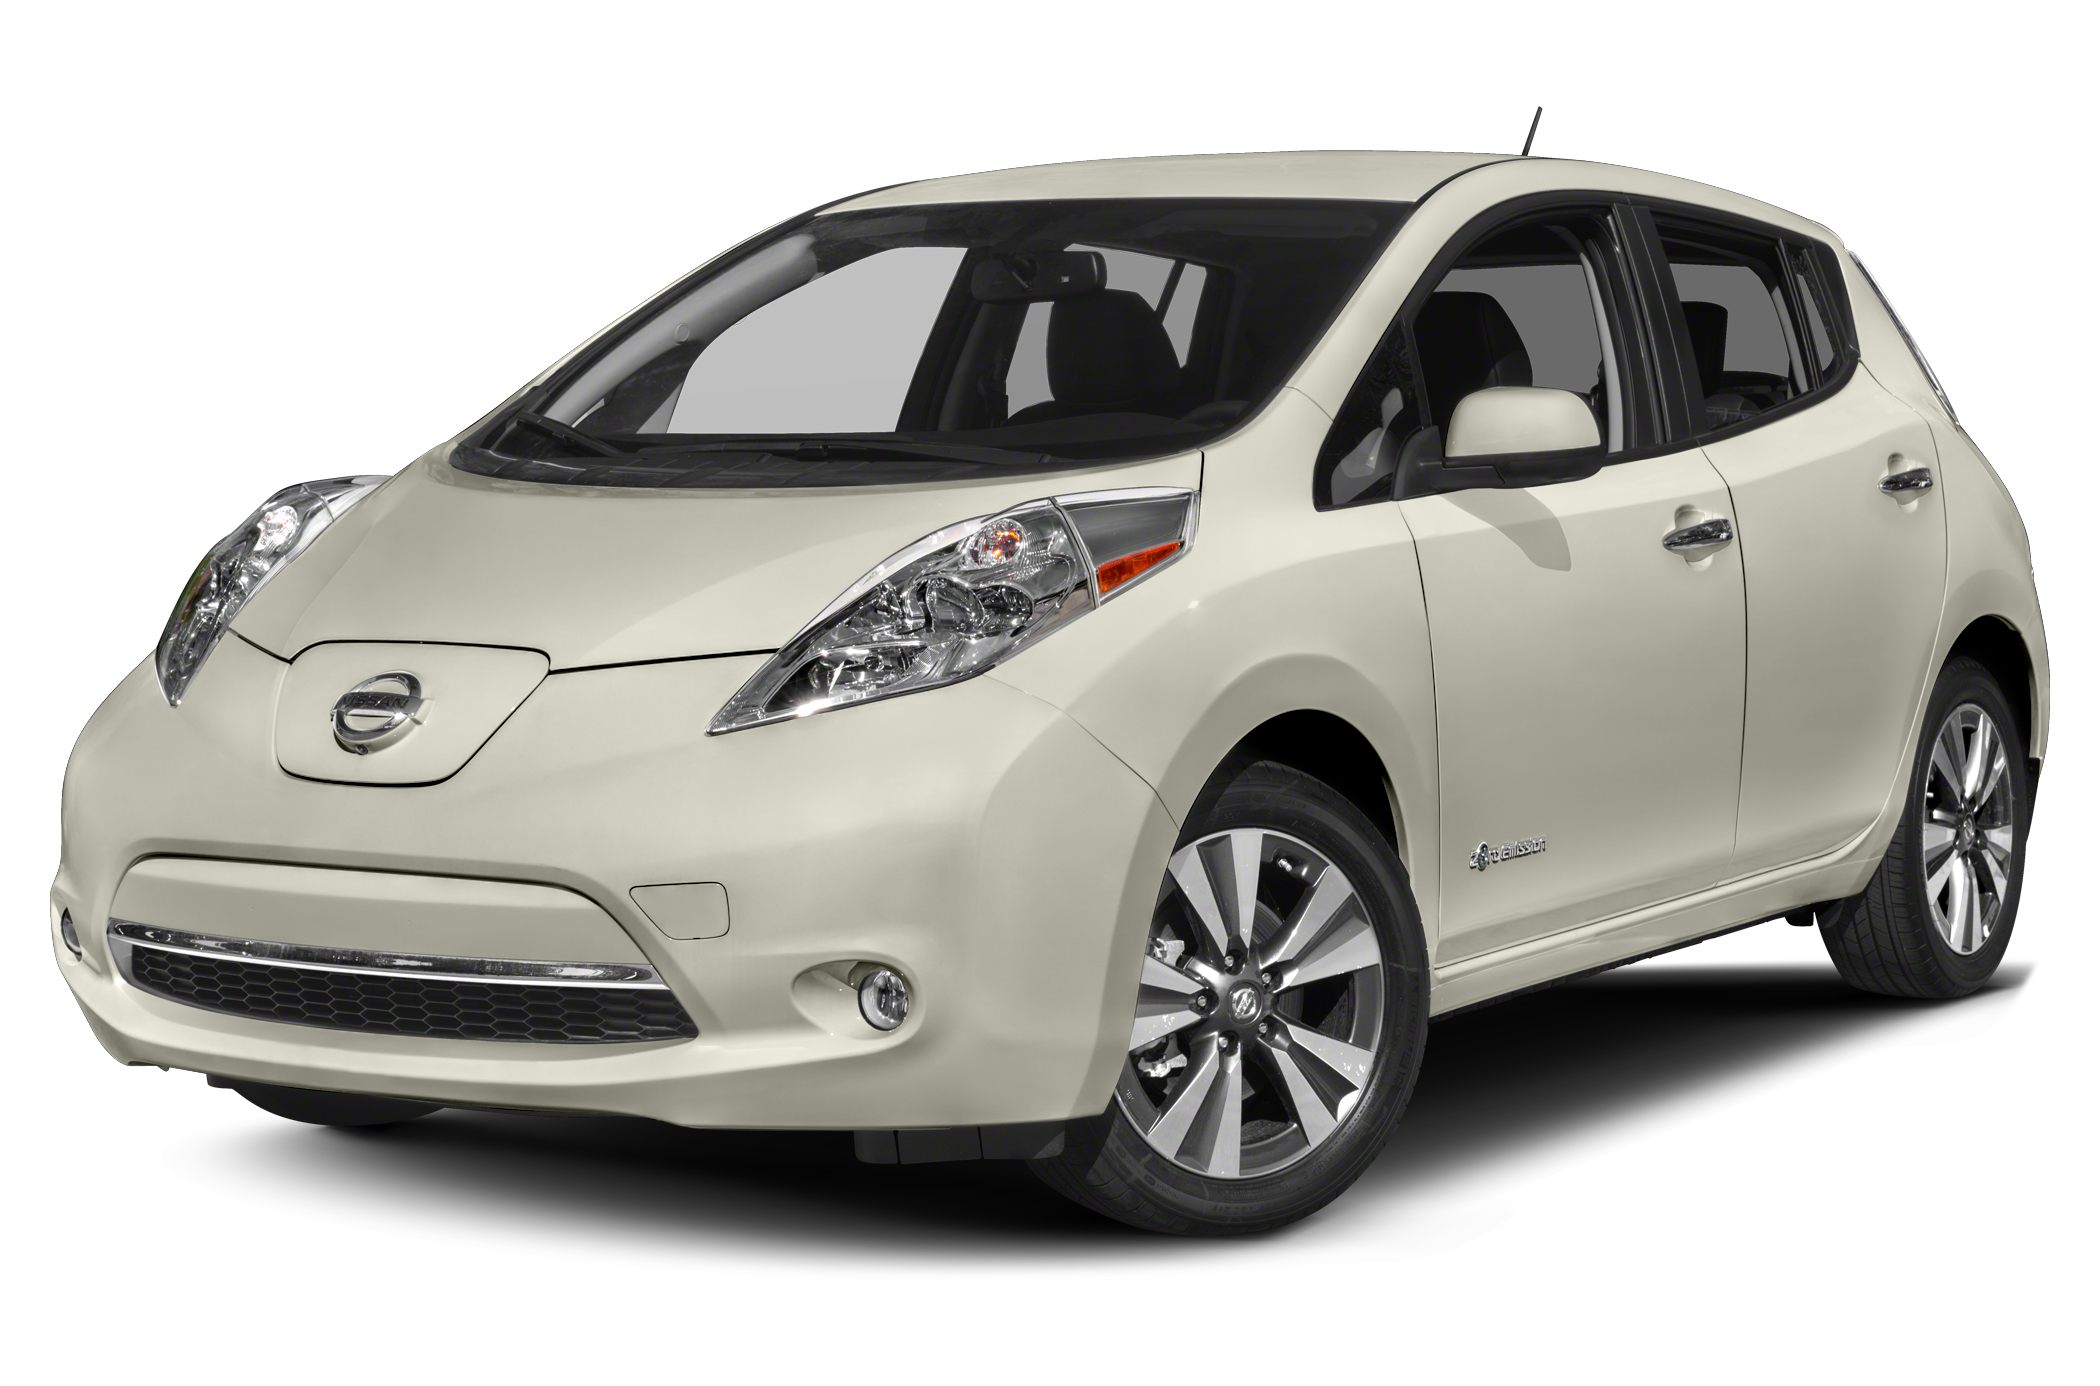 2100x1386 > Nissan Leaf Wallpapers